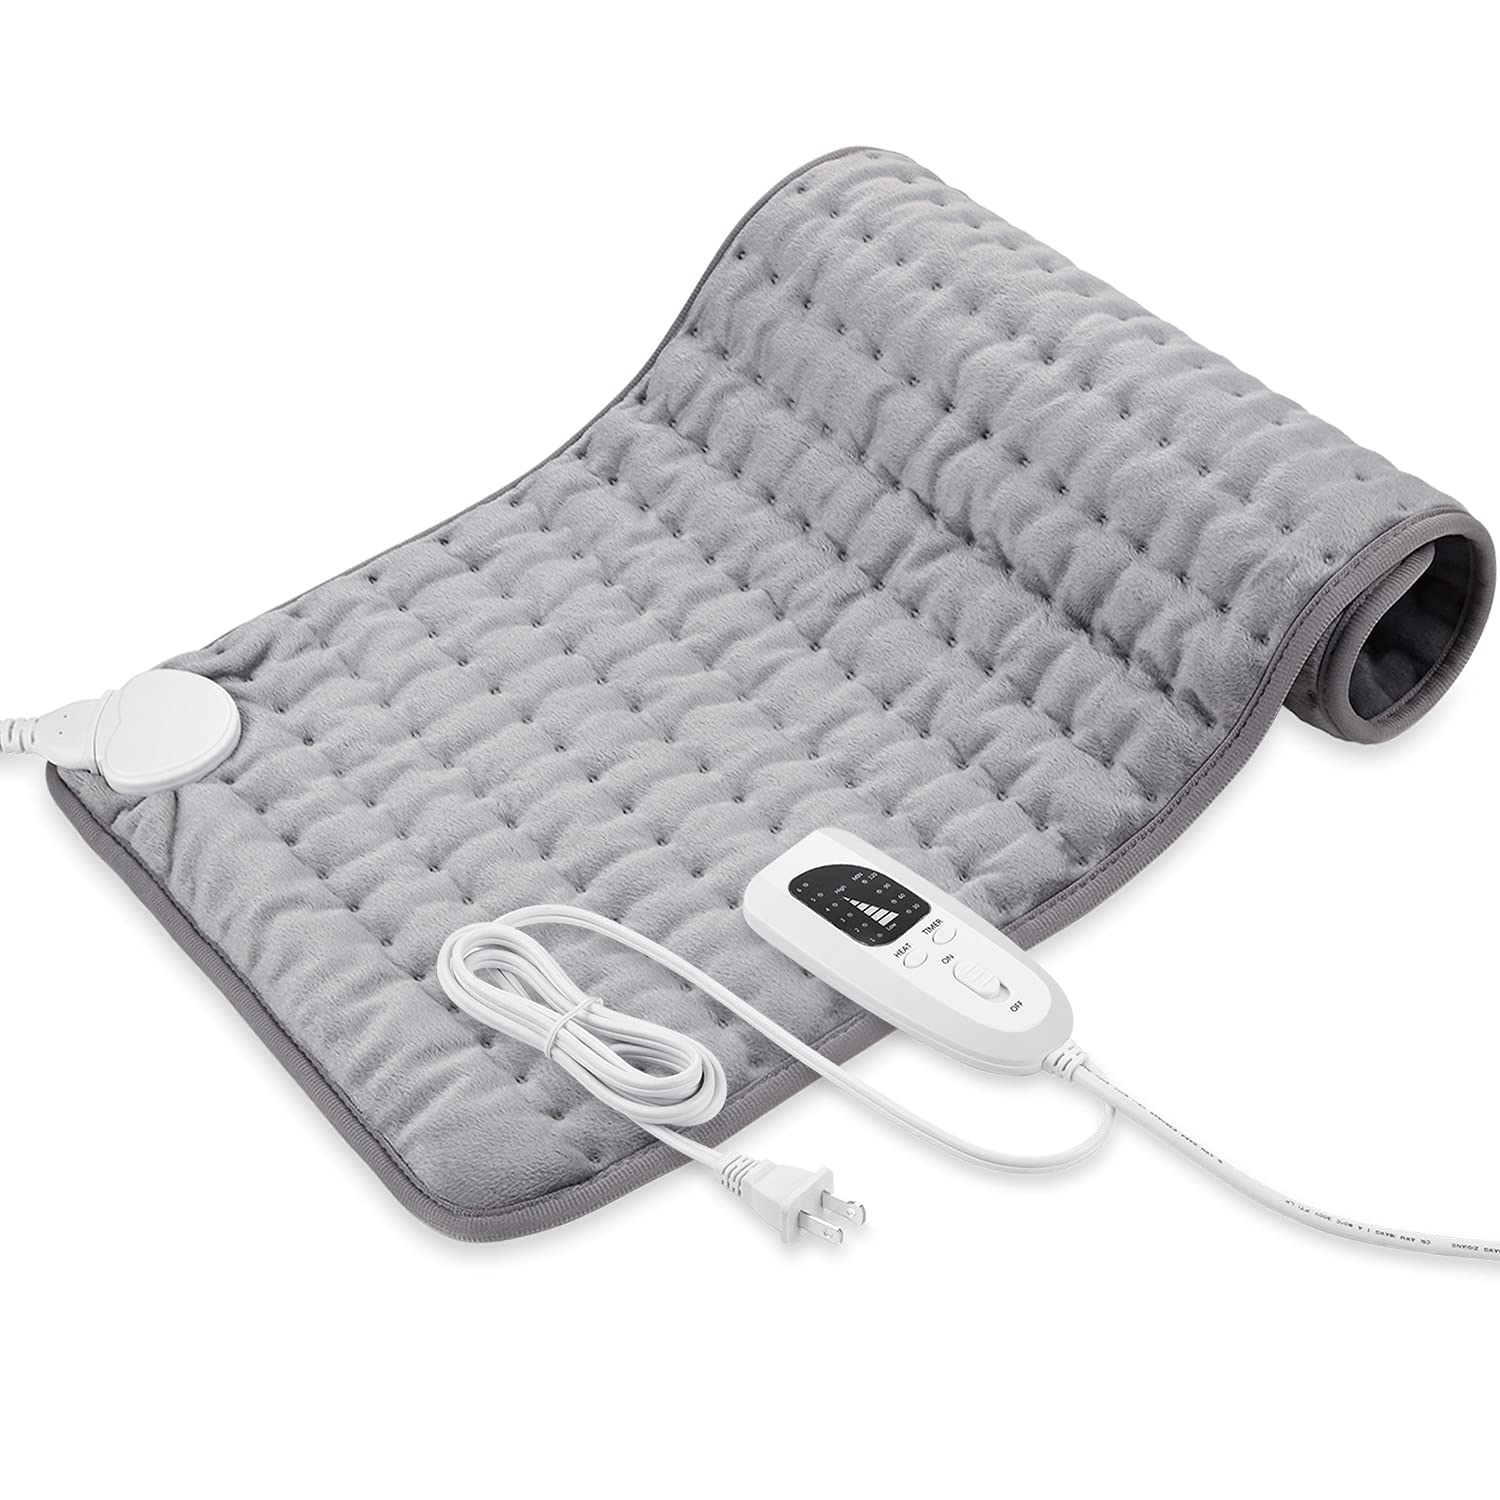 Heating Pad - Electric Heating Pads - Hot Heated Pad for Back Pain Muscle  Pain Relieve - Dry & Moist Heat Therapy Option - Auto Shut Off Function  (Light Gray, 12 x